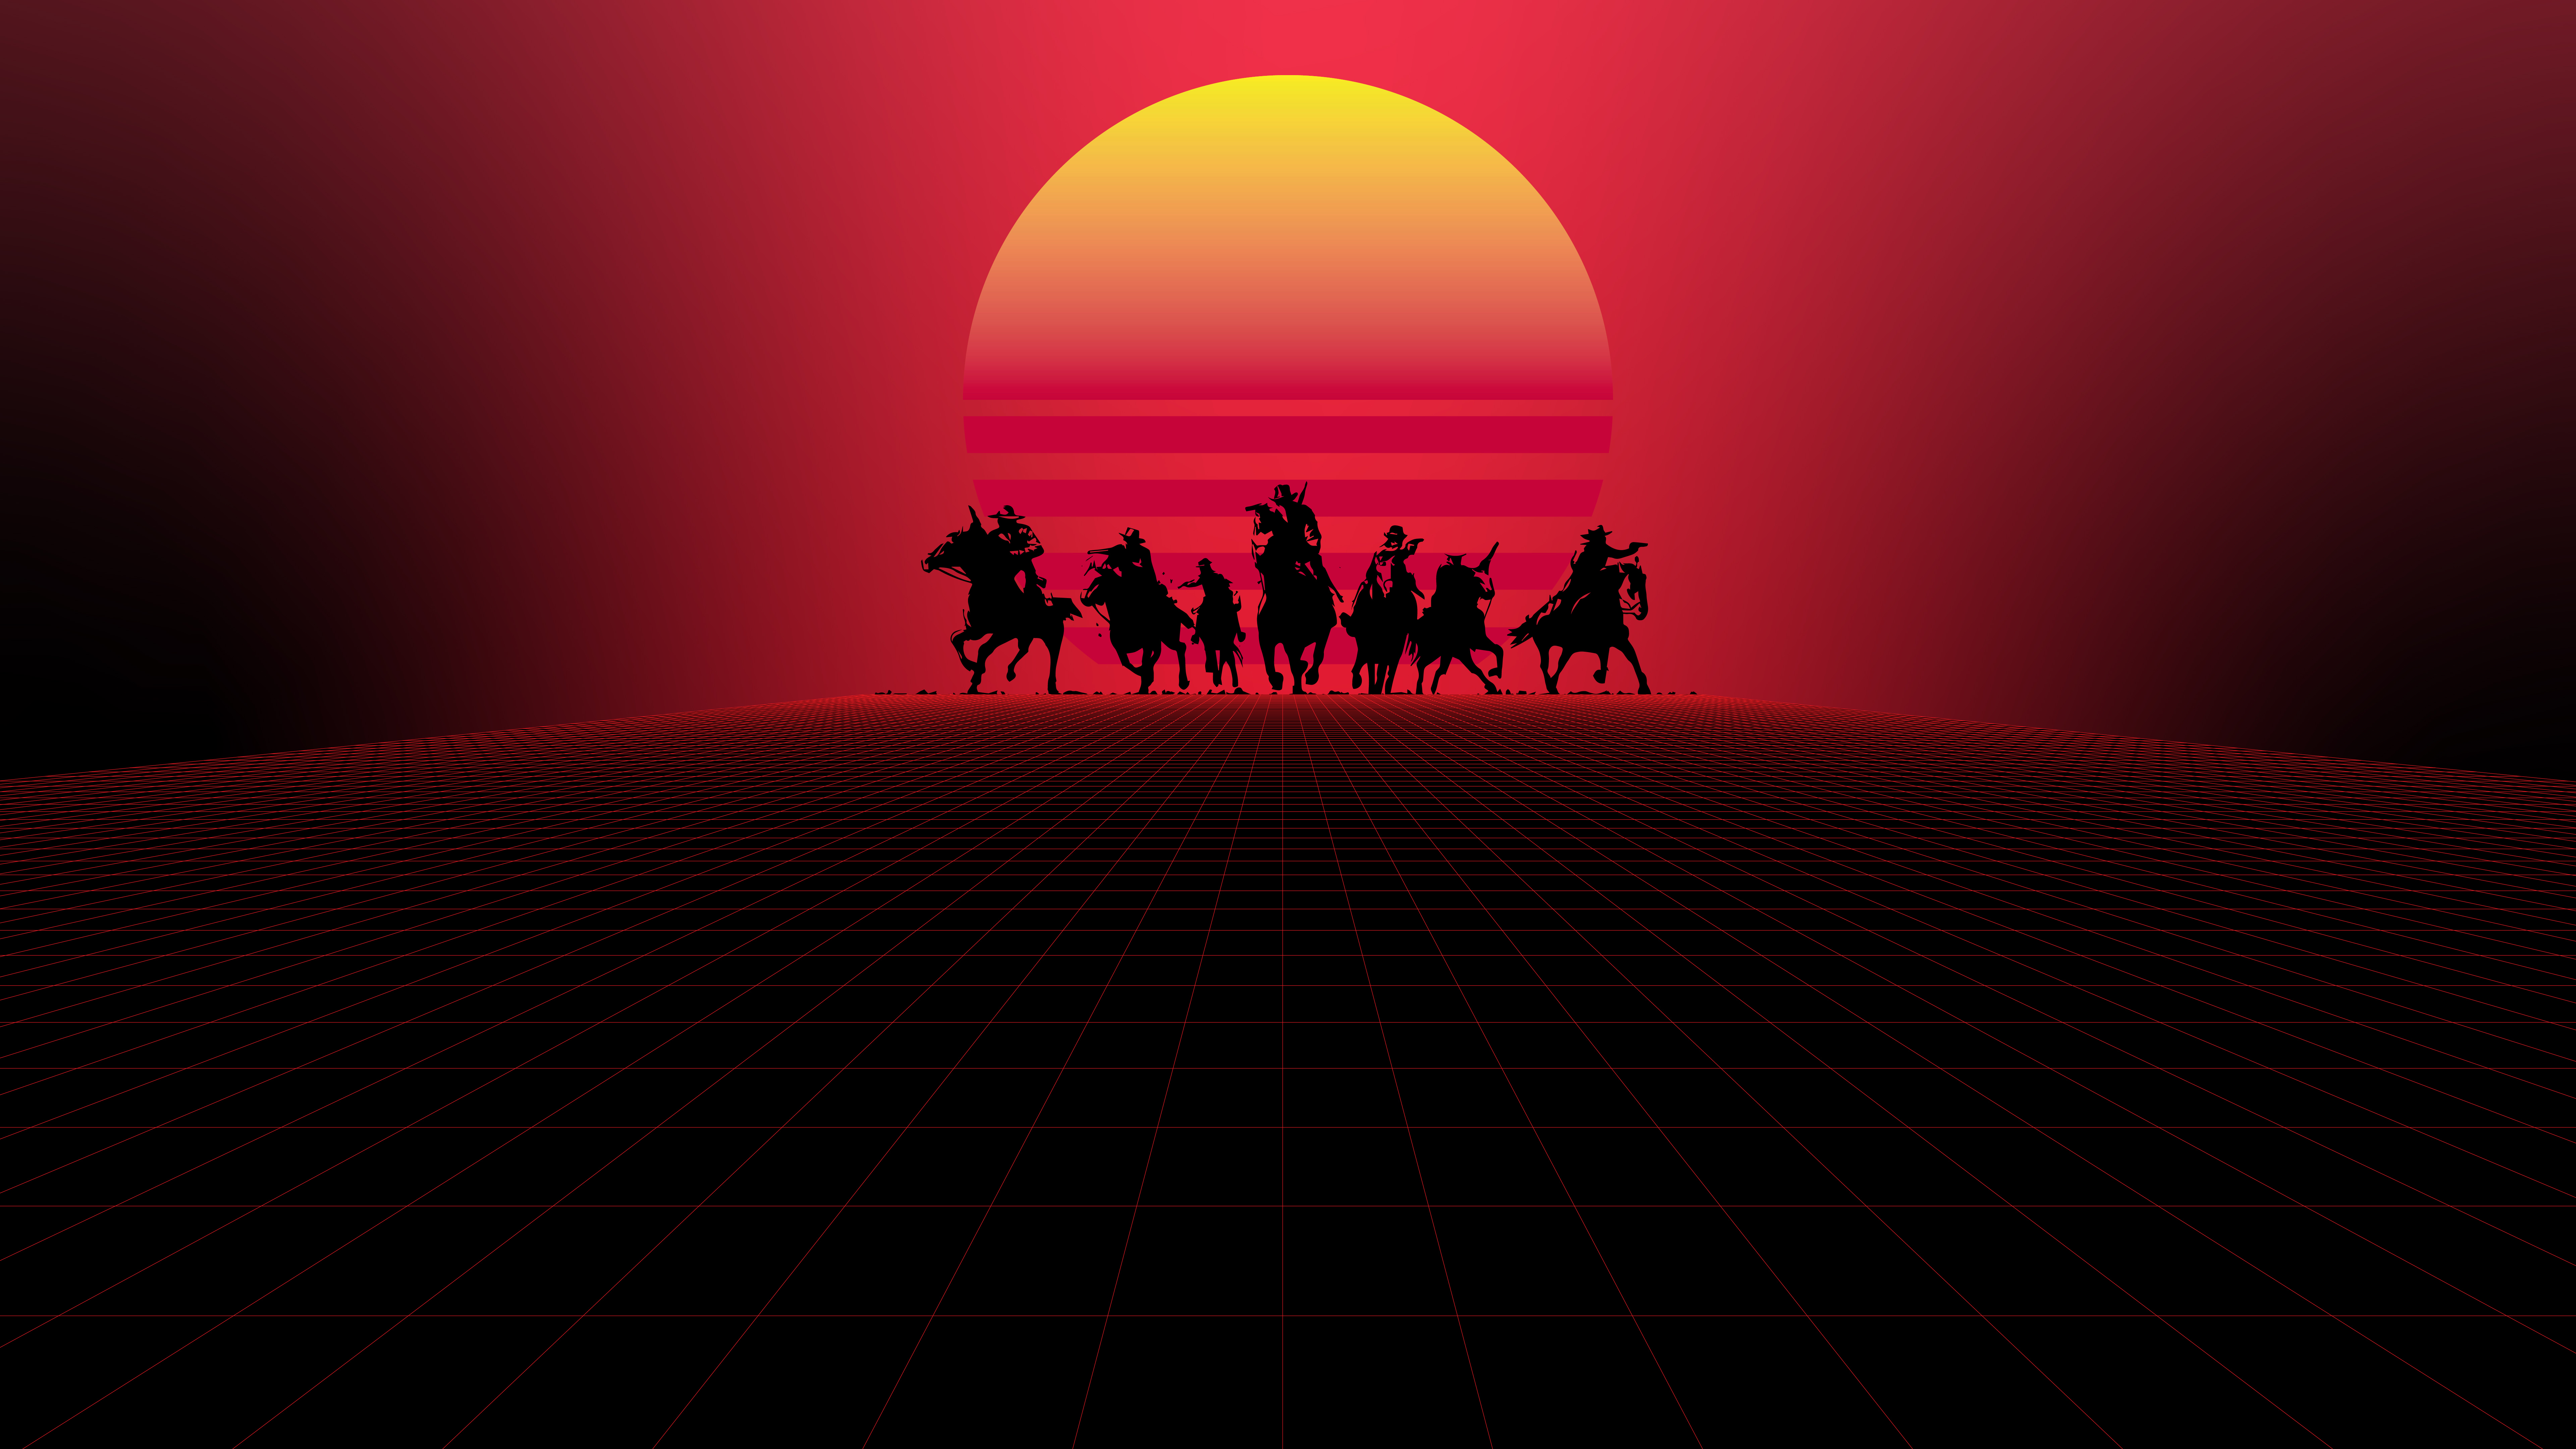 Red Dead Redemption 8K Wallpapers